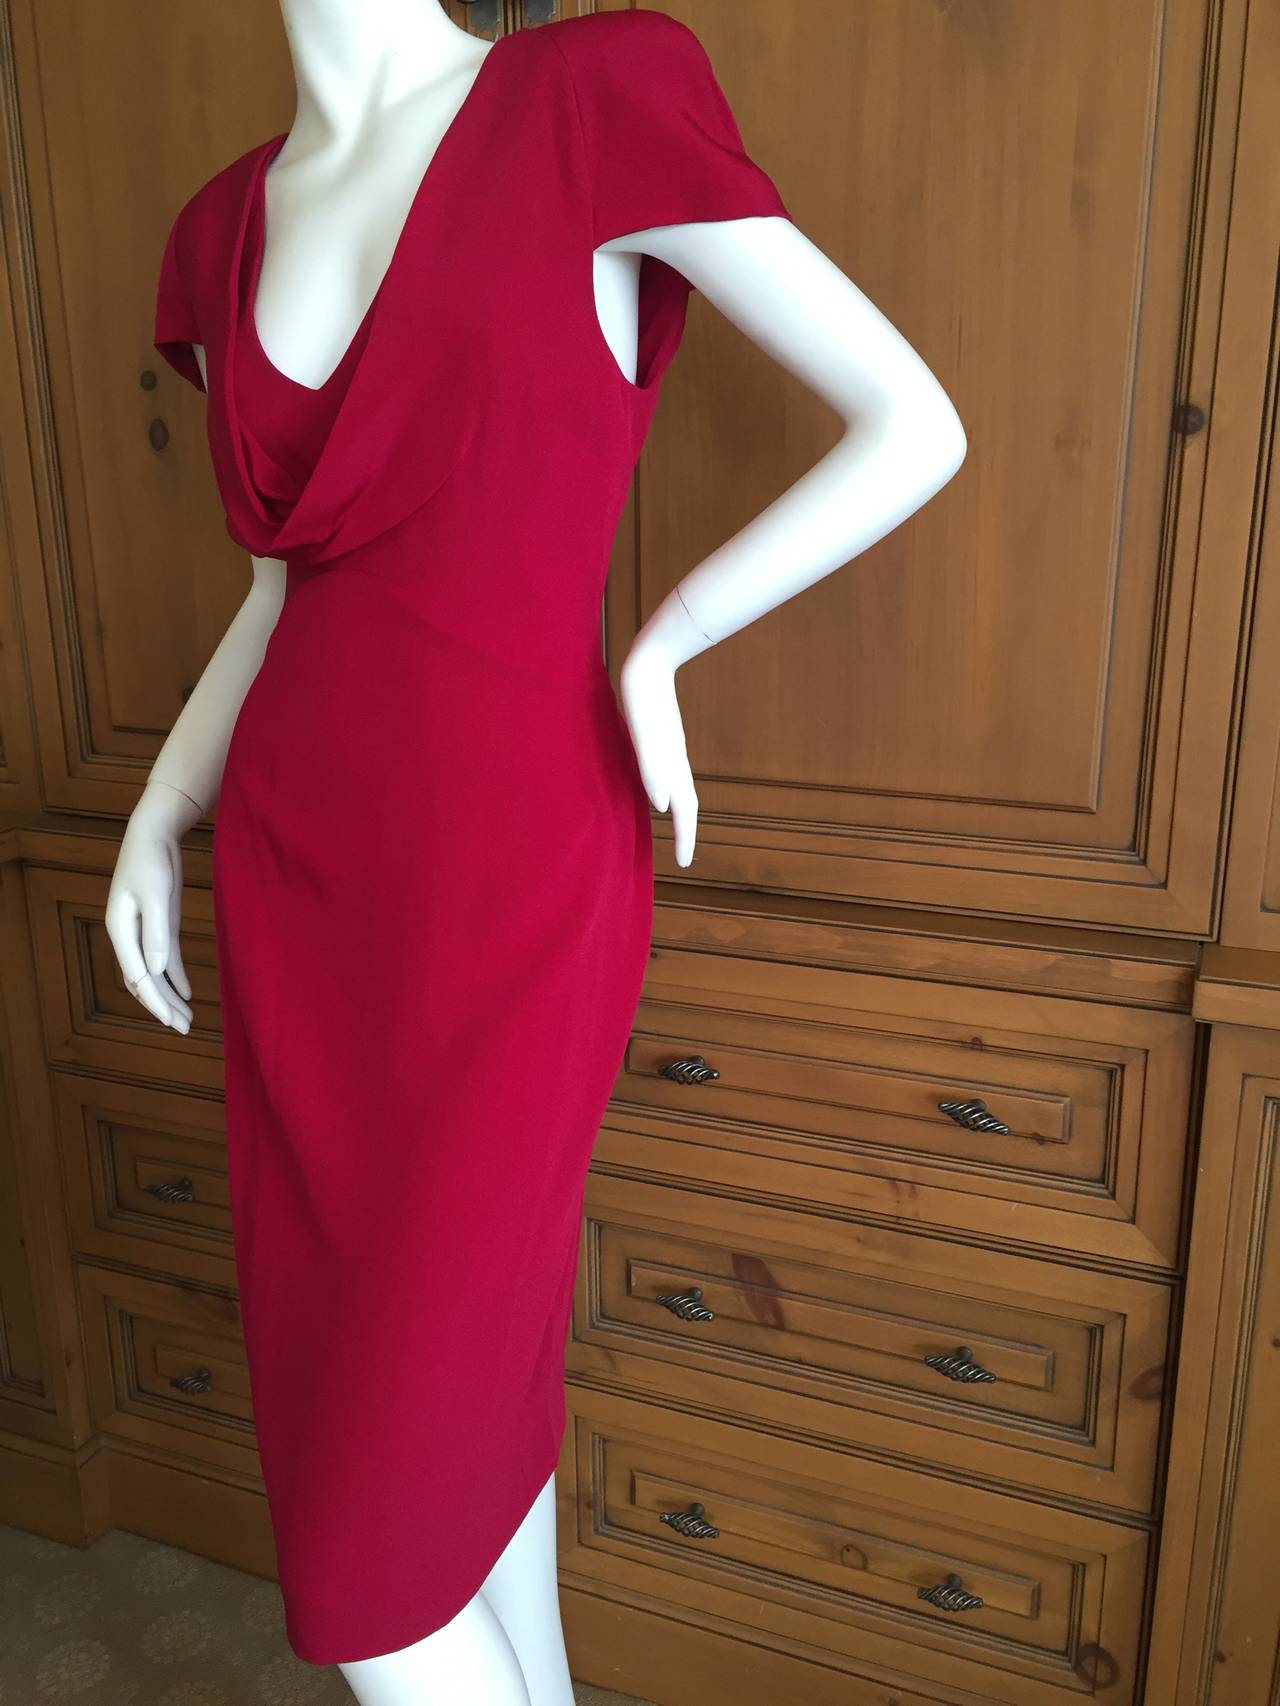 Lovely scoop neck silk dress in rasberry from Alexander McQueen.
New with tags
sz 46